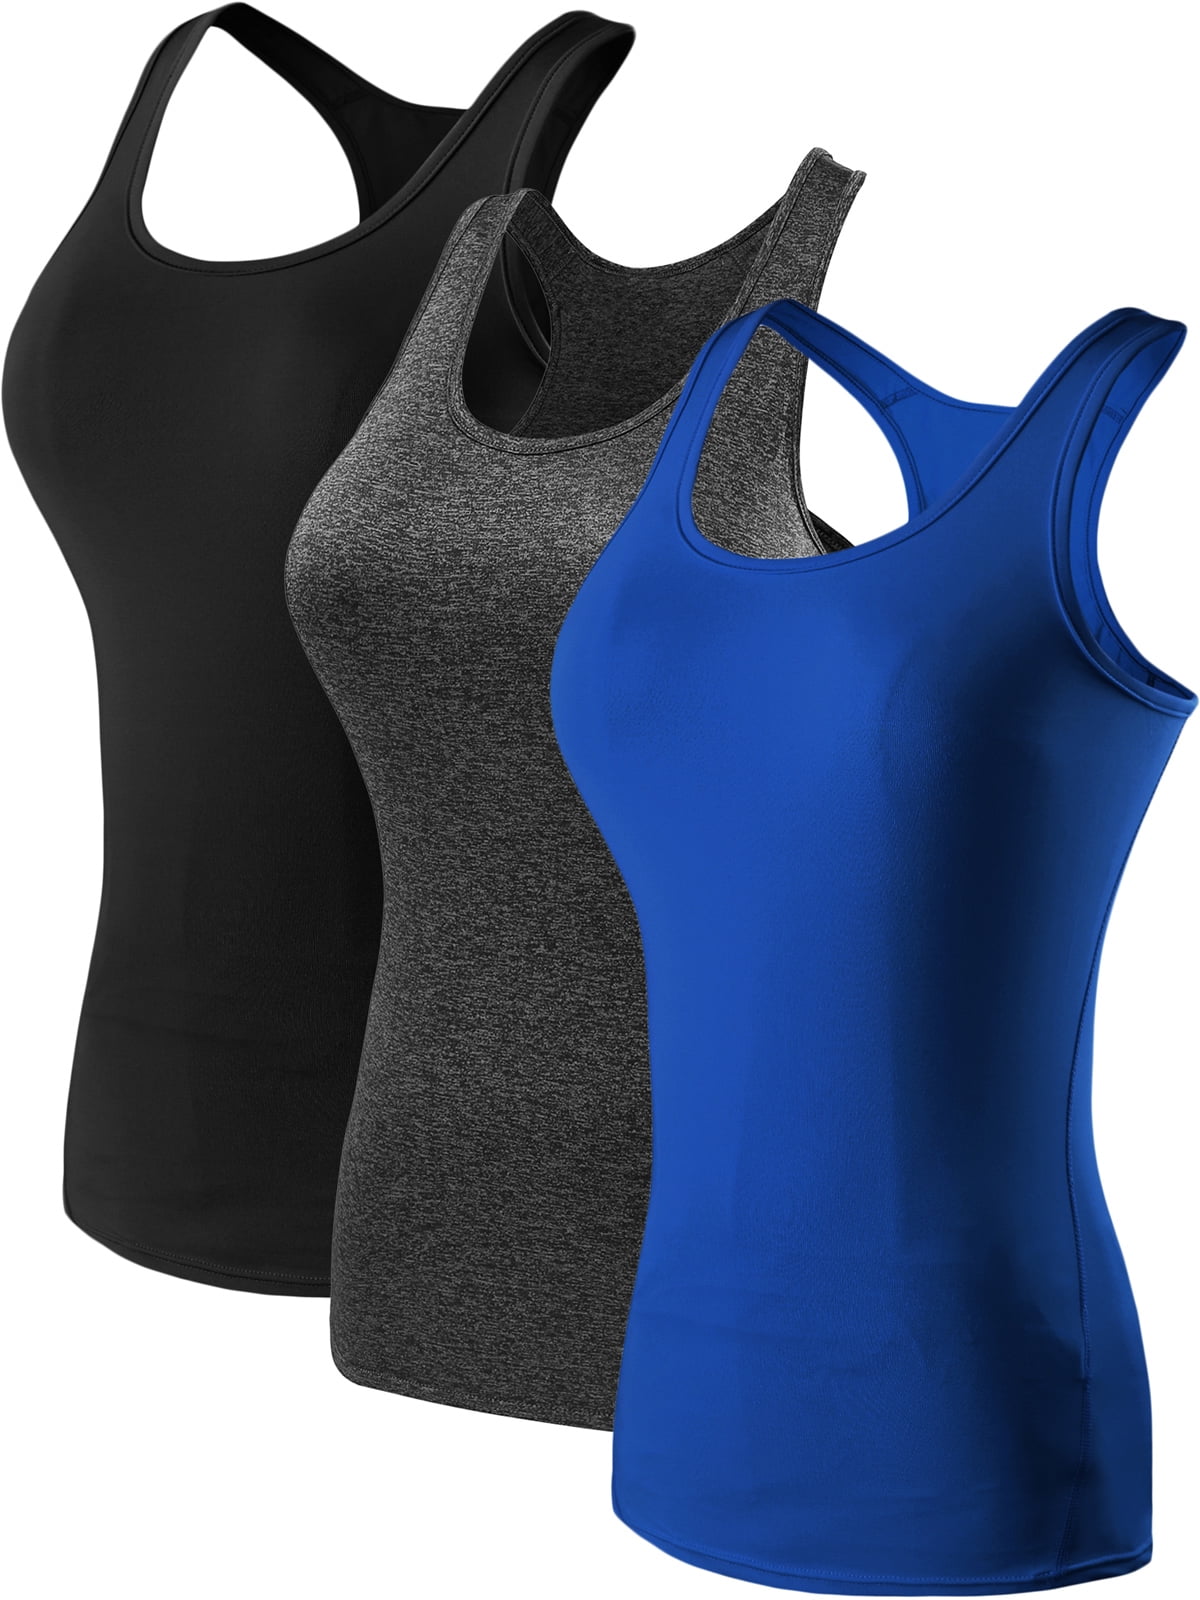 NELEUS Womens Compression Base Layer Dry Fit Tank Top 3 Pack,Blue+Green+Pink,US  Size XS 